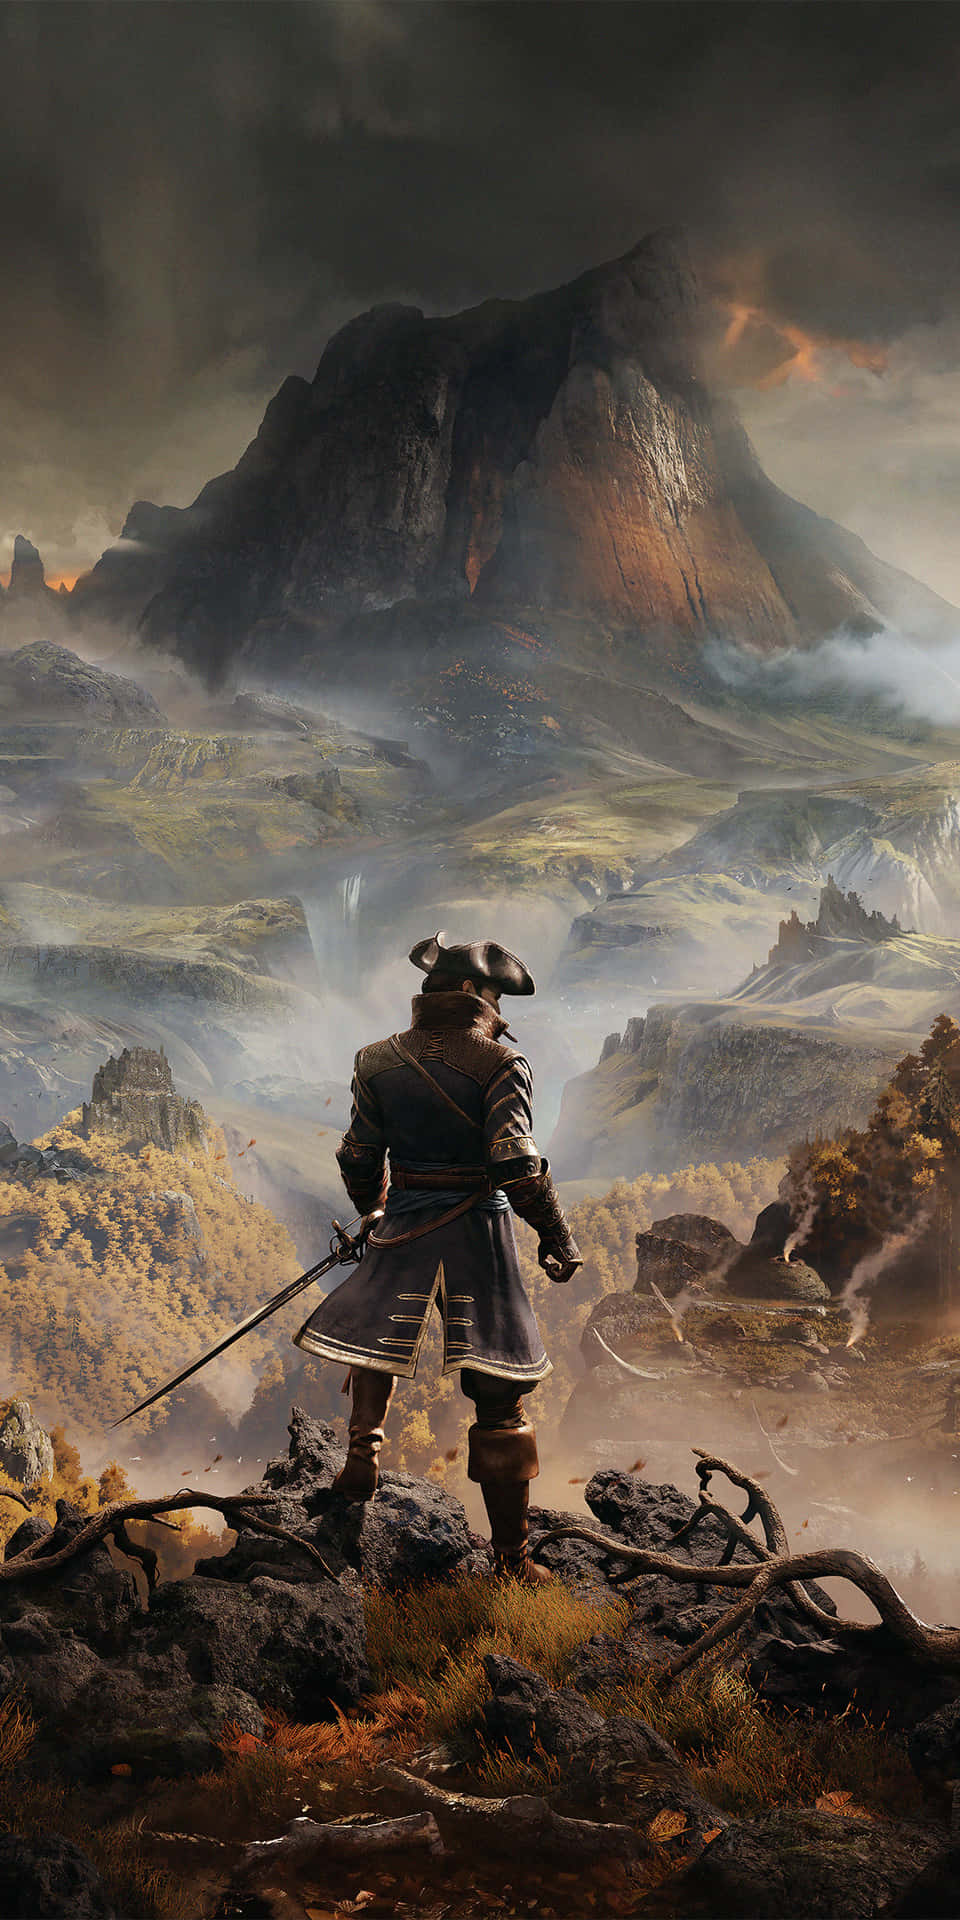 Get immersive gameplay with the all-new Pixel 3 and Greedfall